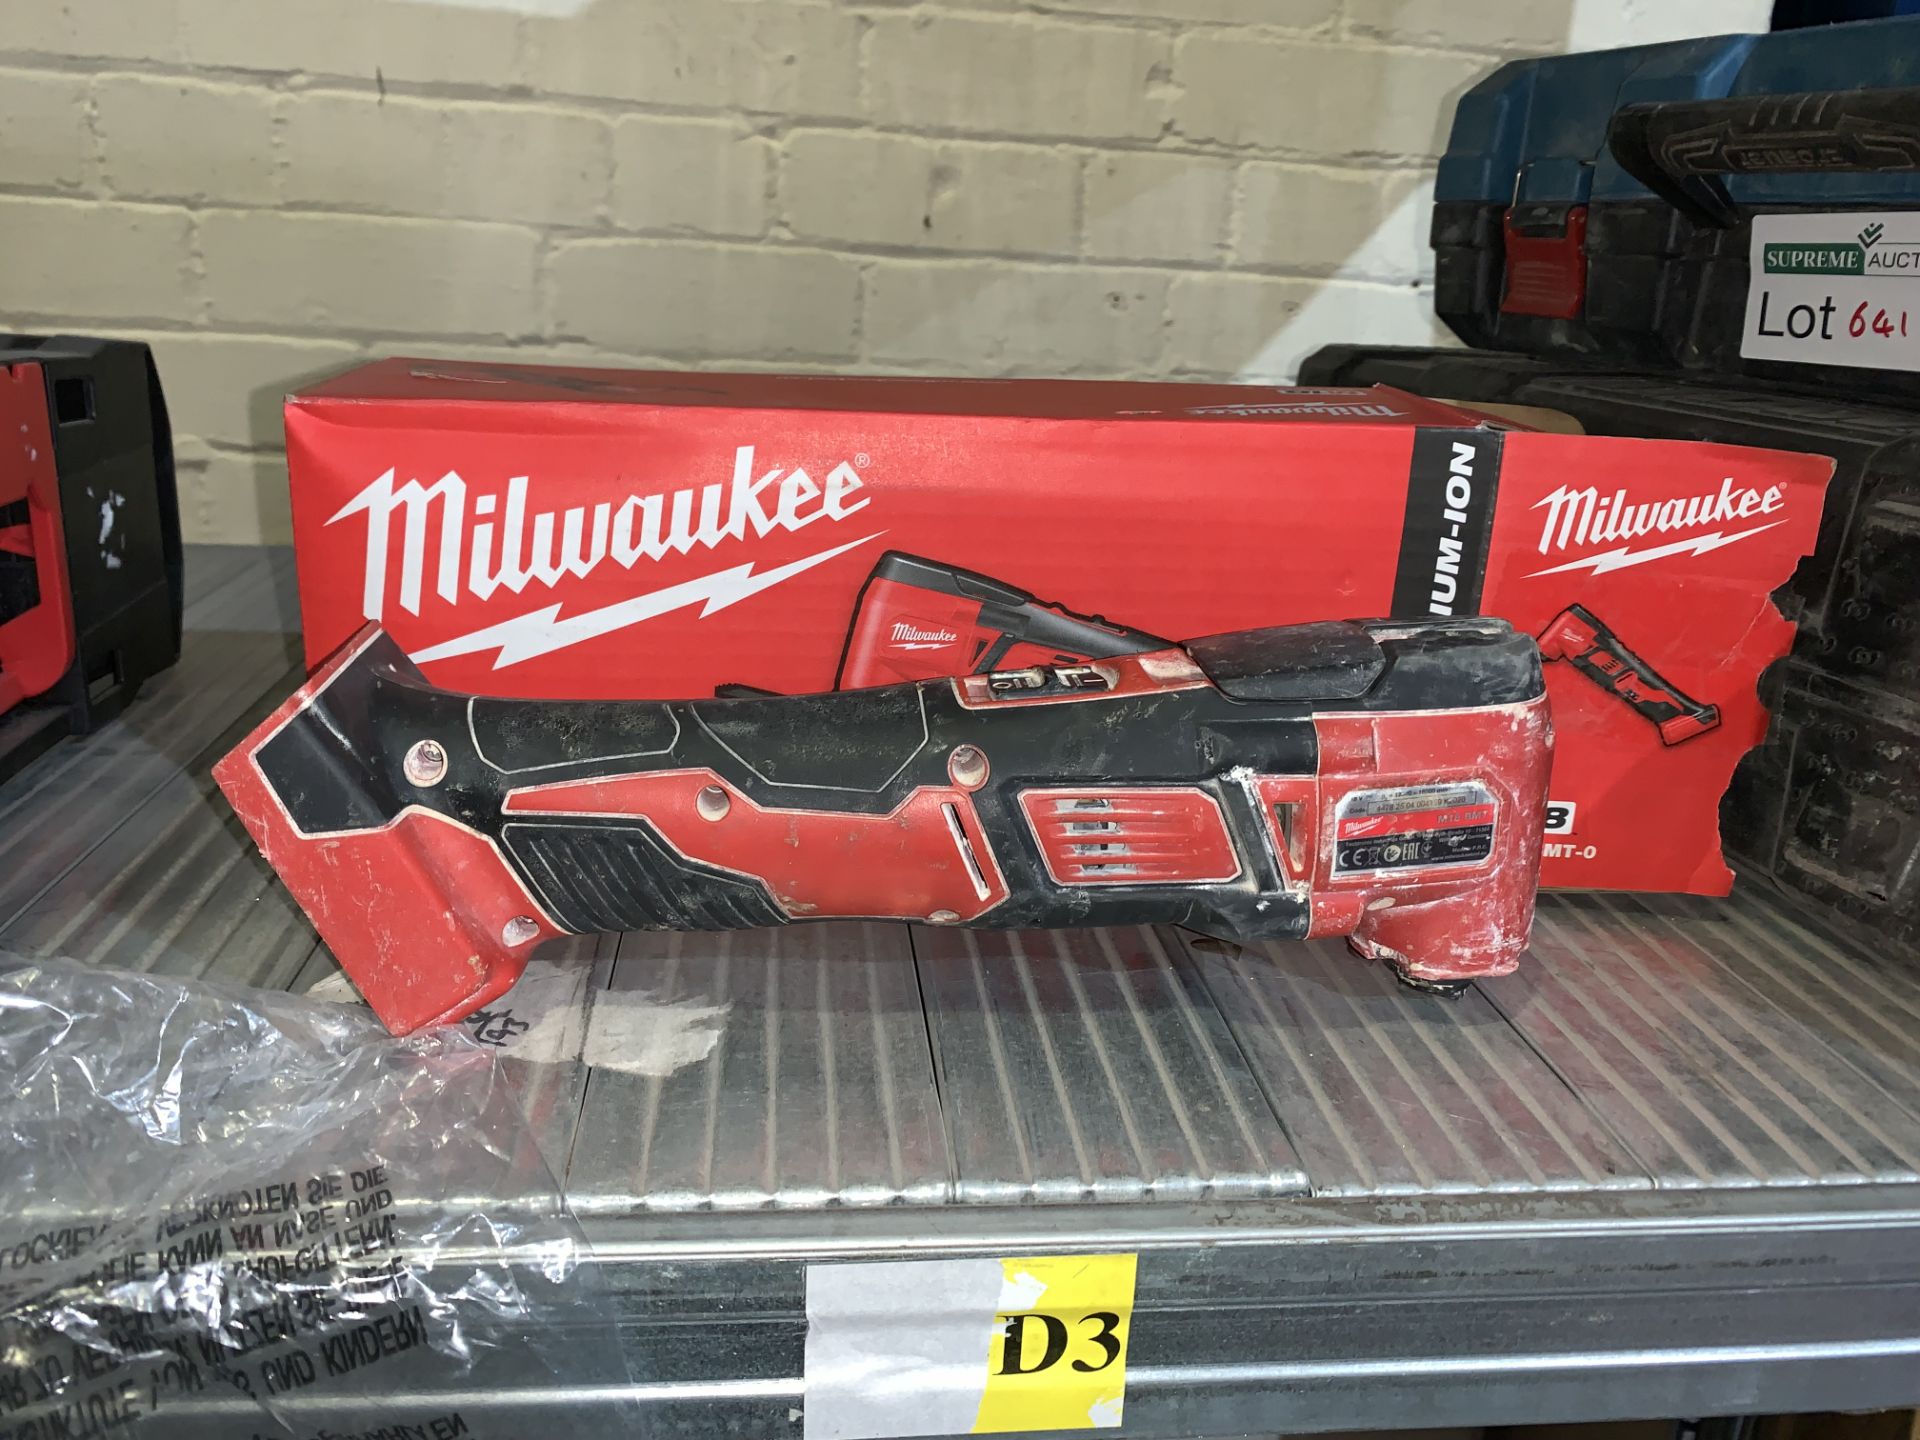 MILWAUKEE M18 BMT-0 18V LI-ION CORDLESS MULTI-TOOL - BARE UNCHECKED/UNTESTED - BW